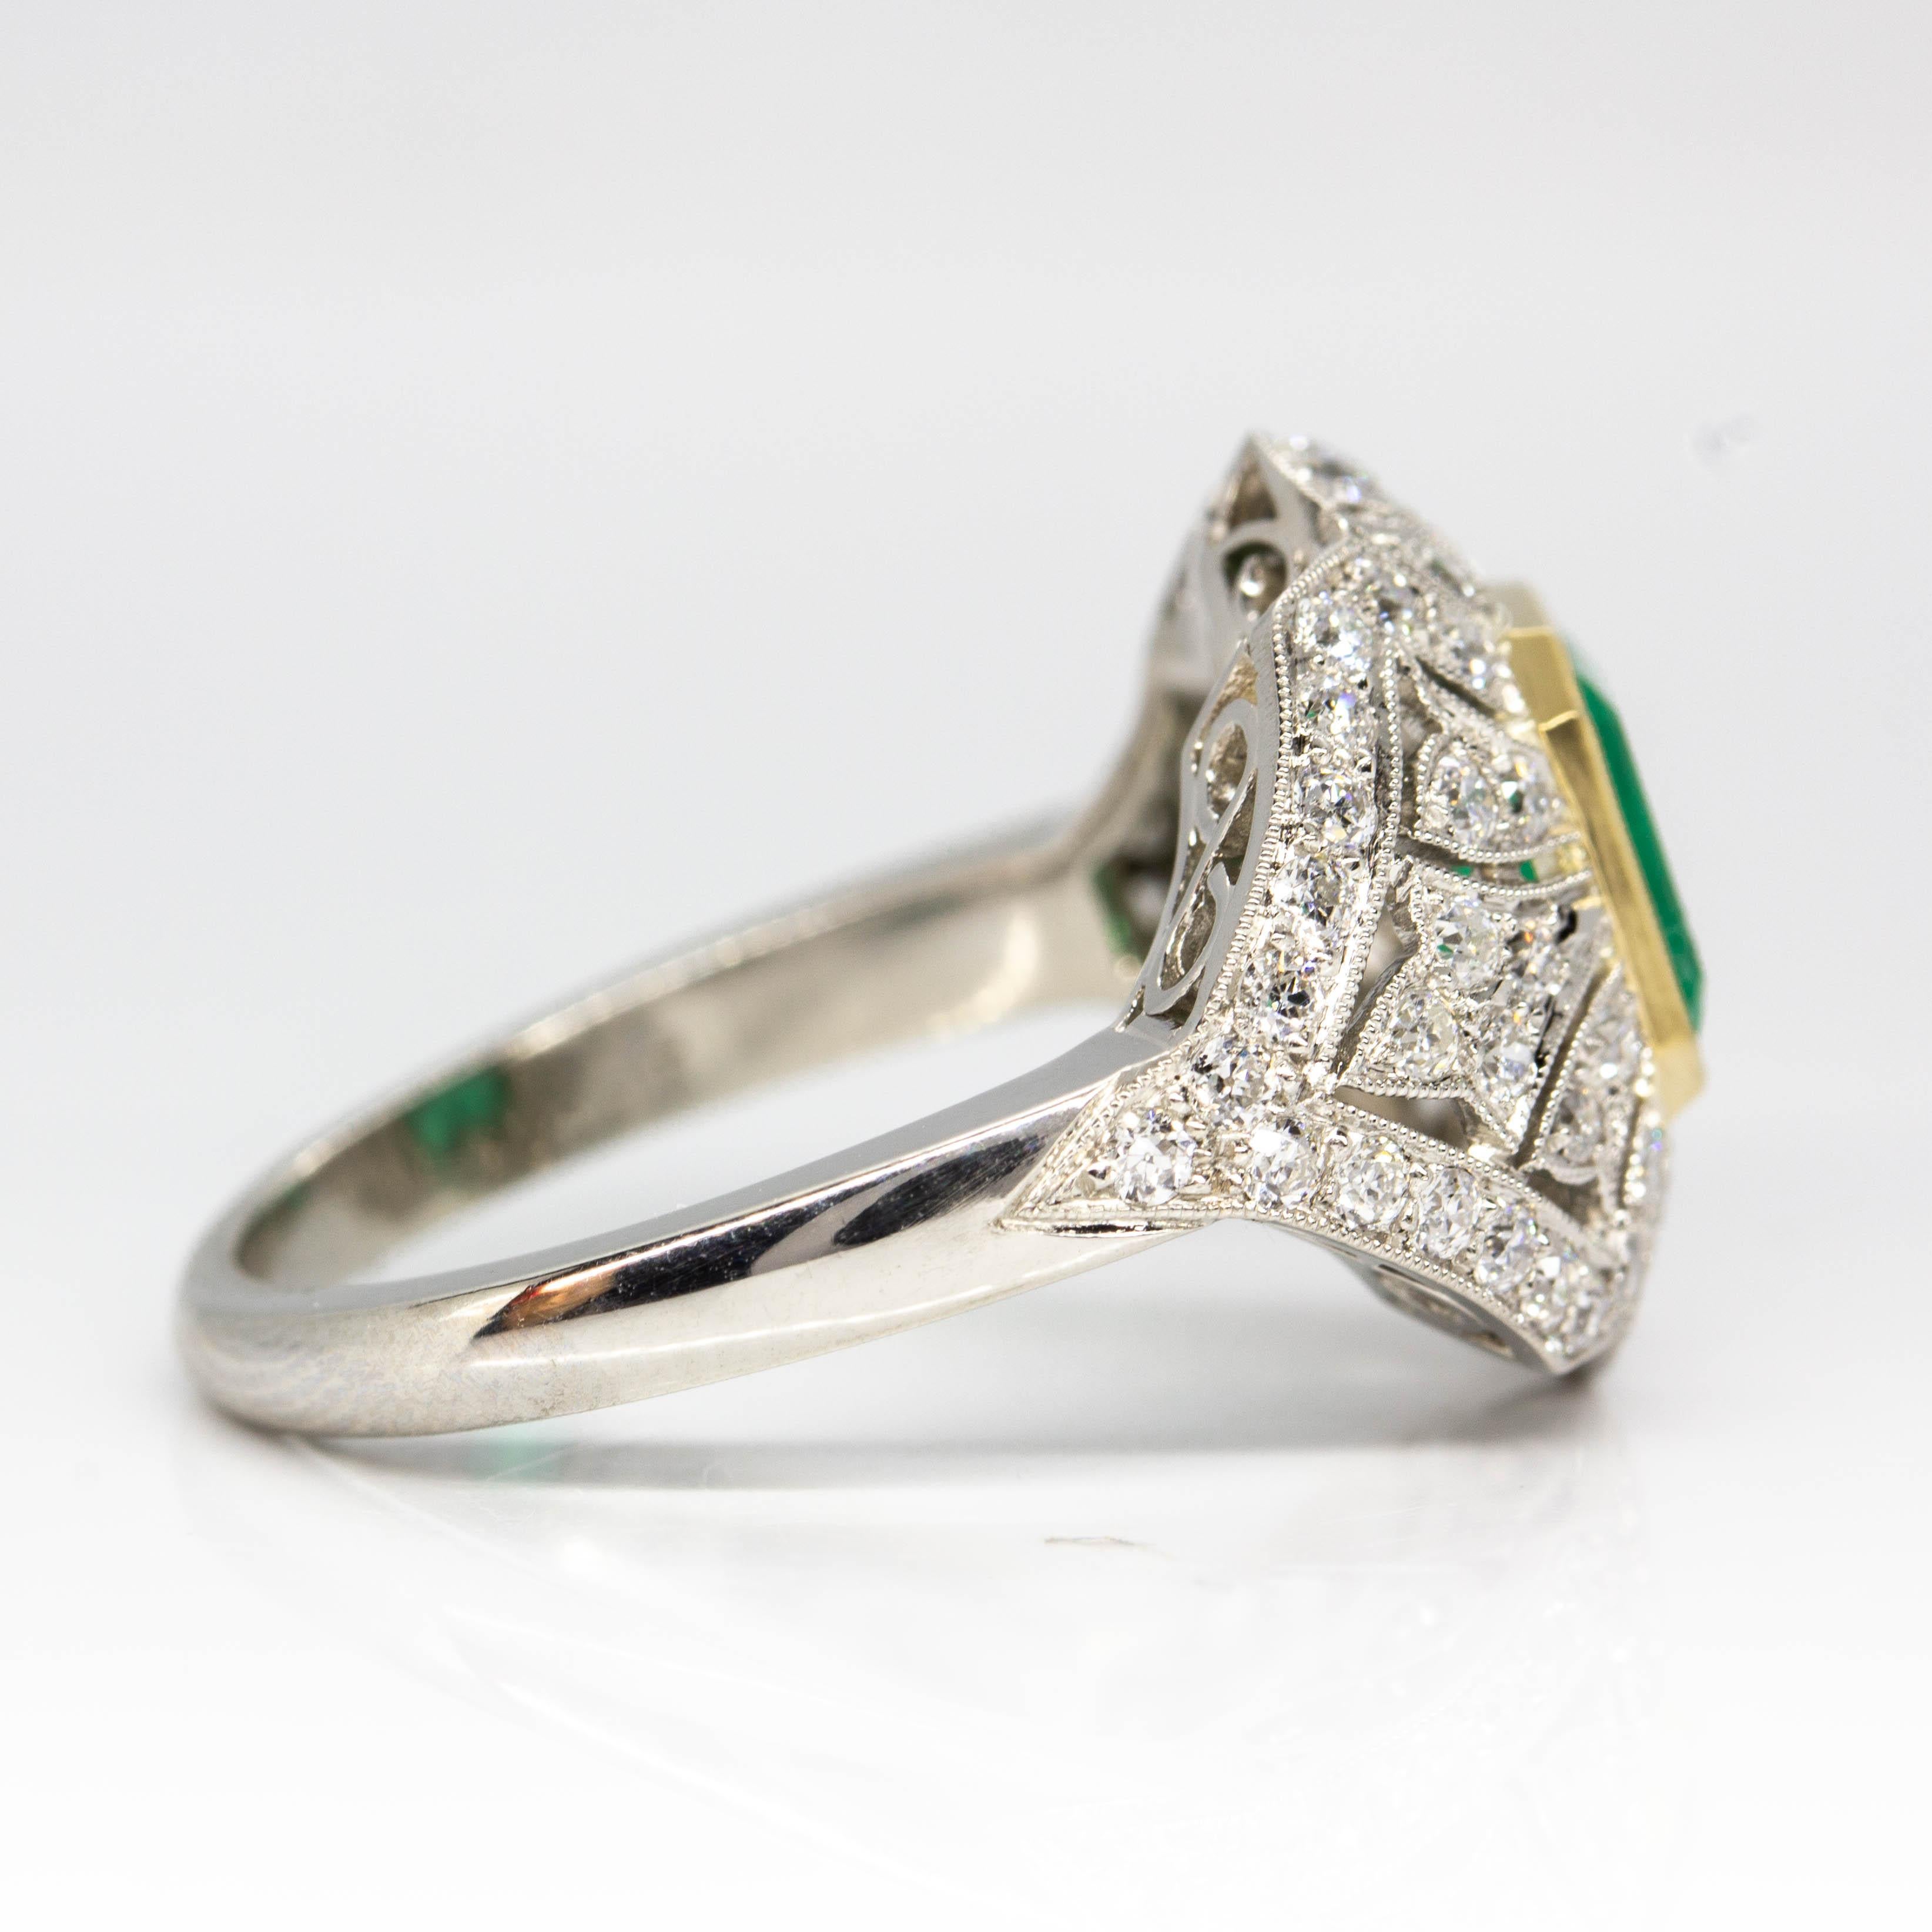 Composition: Platinum 
•	1 Colombian natural emerald 1.15ctw.
•	56 old mine cut diamonds H-VS1 1.05ctw.
Ring size: 7 ¾ 
Ring face measure: 16mm x 22mm 
Rise above finger: 7mm
Total weight: 7.3 grams – 4.6dwt
